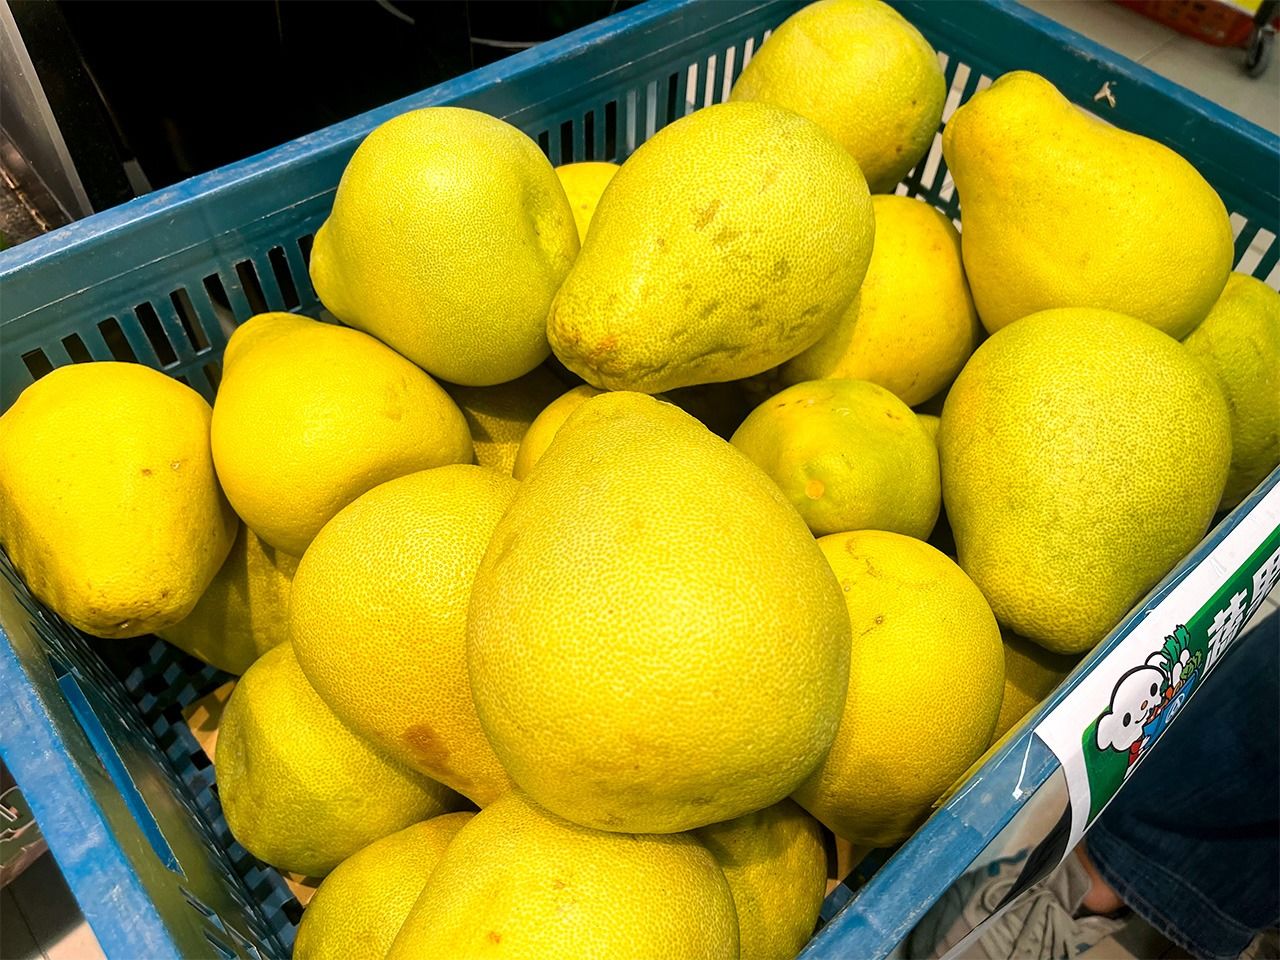 Pomelos are called youzi in Taiwan. They grow well in mildly alkaline soils and are weak against acidity. The Madou district of Tainan, Taiwan, is a famous producer. (© Katakura Yoshifumi)